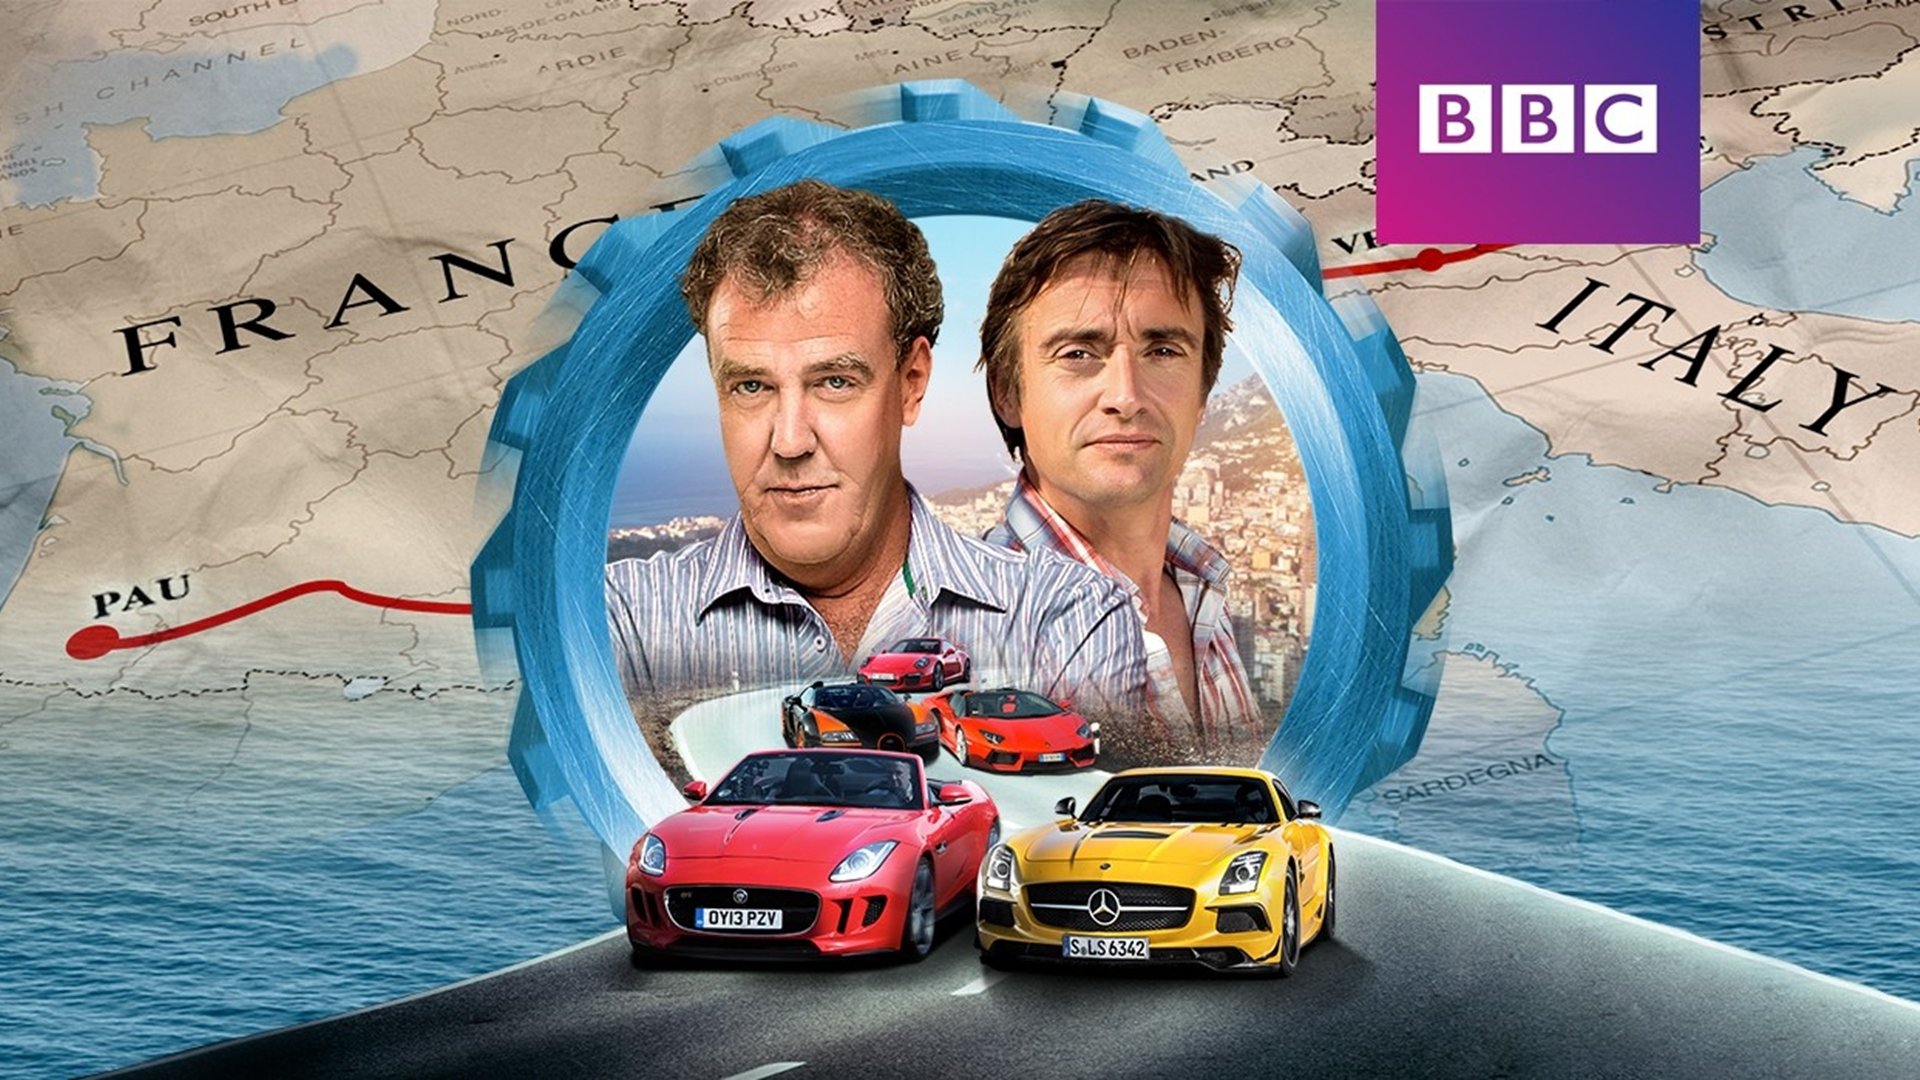 Top Gear: The Perfect Road Trip